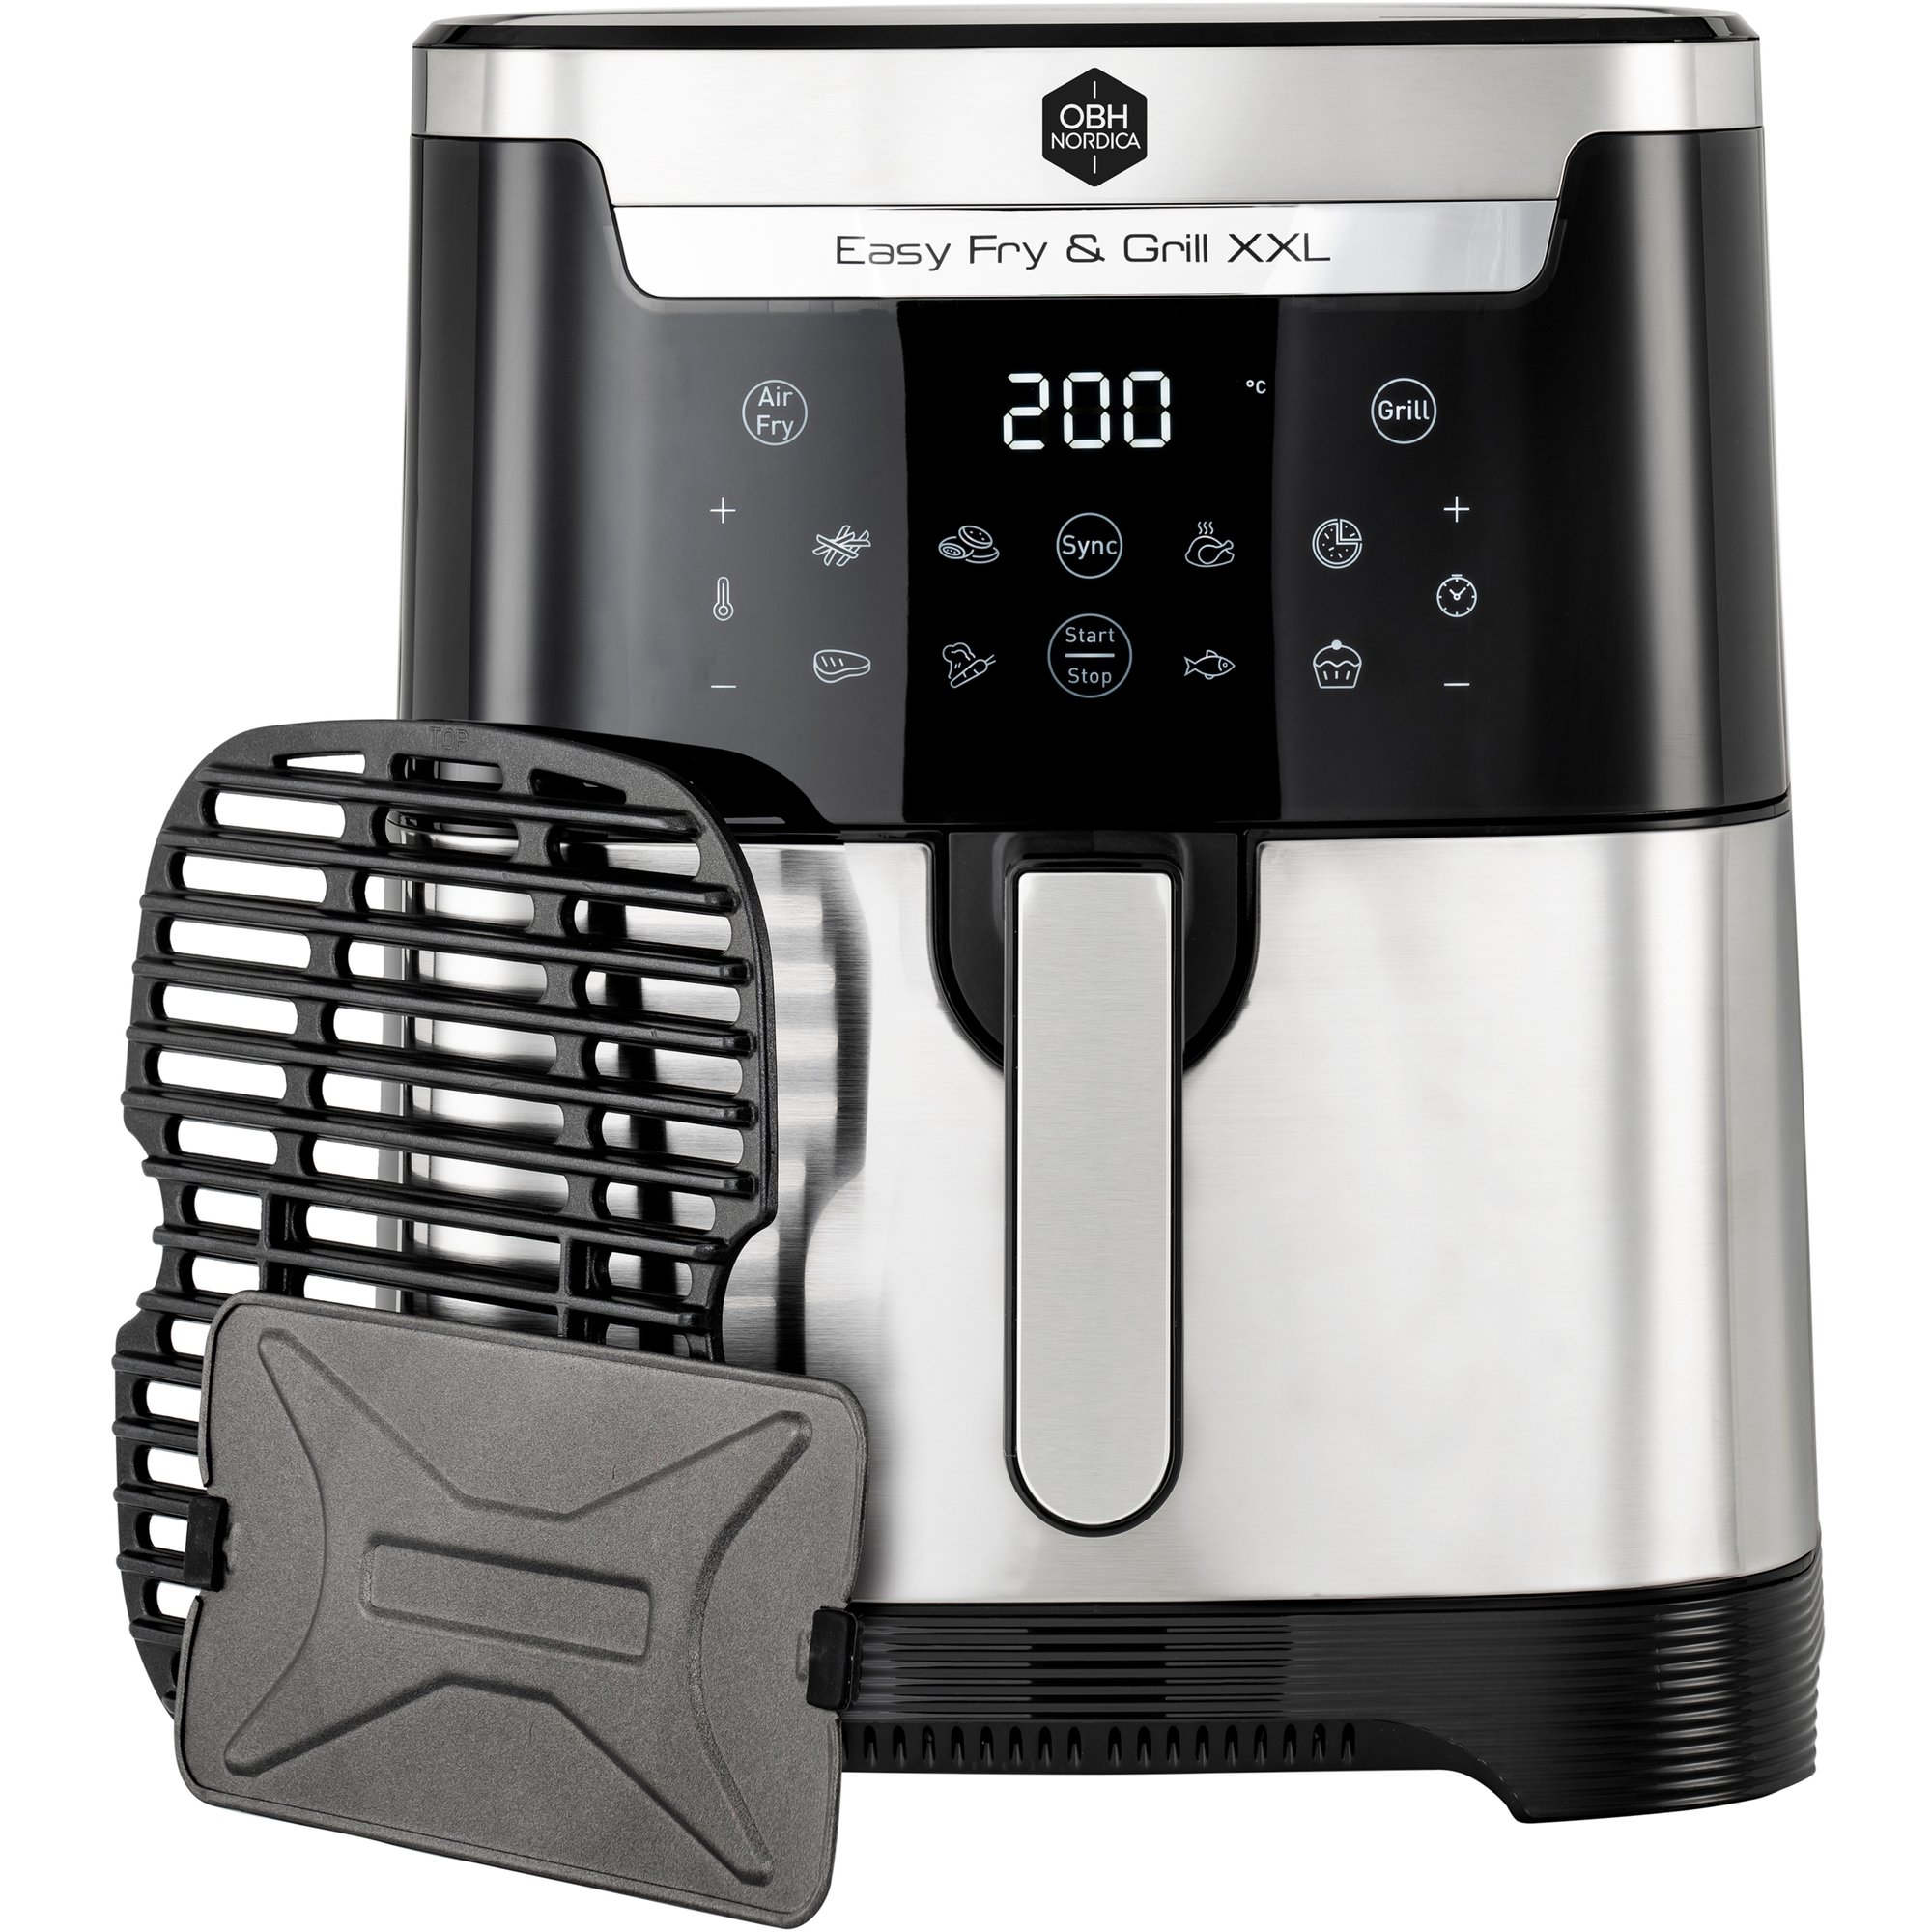 OBH Nordica Easy Fry & Grill XXL 2-in-1 airfryer, 6,5 liter